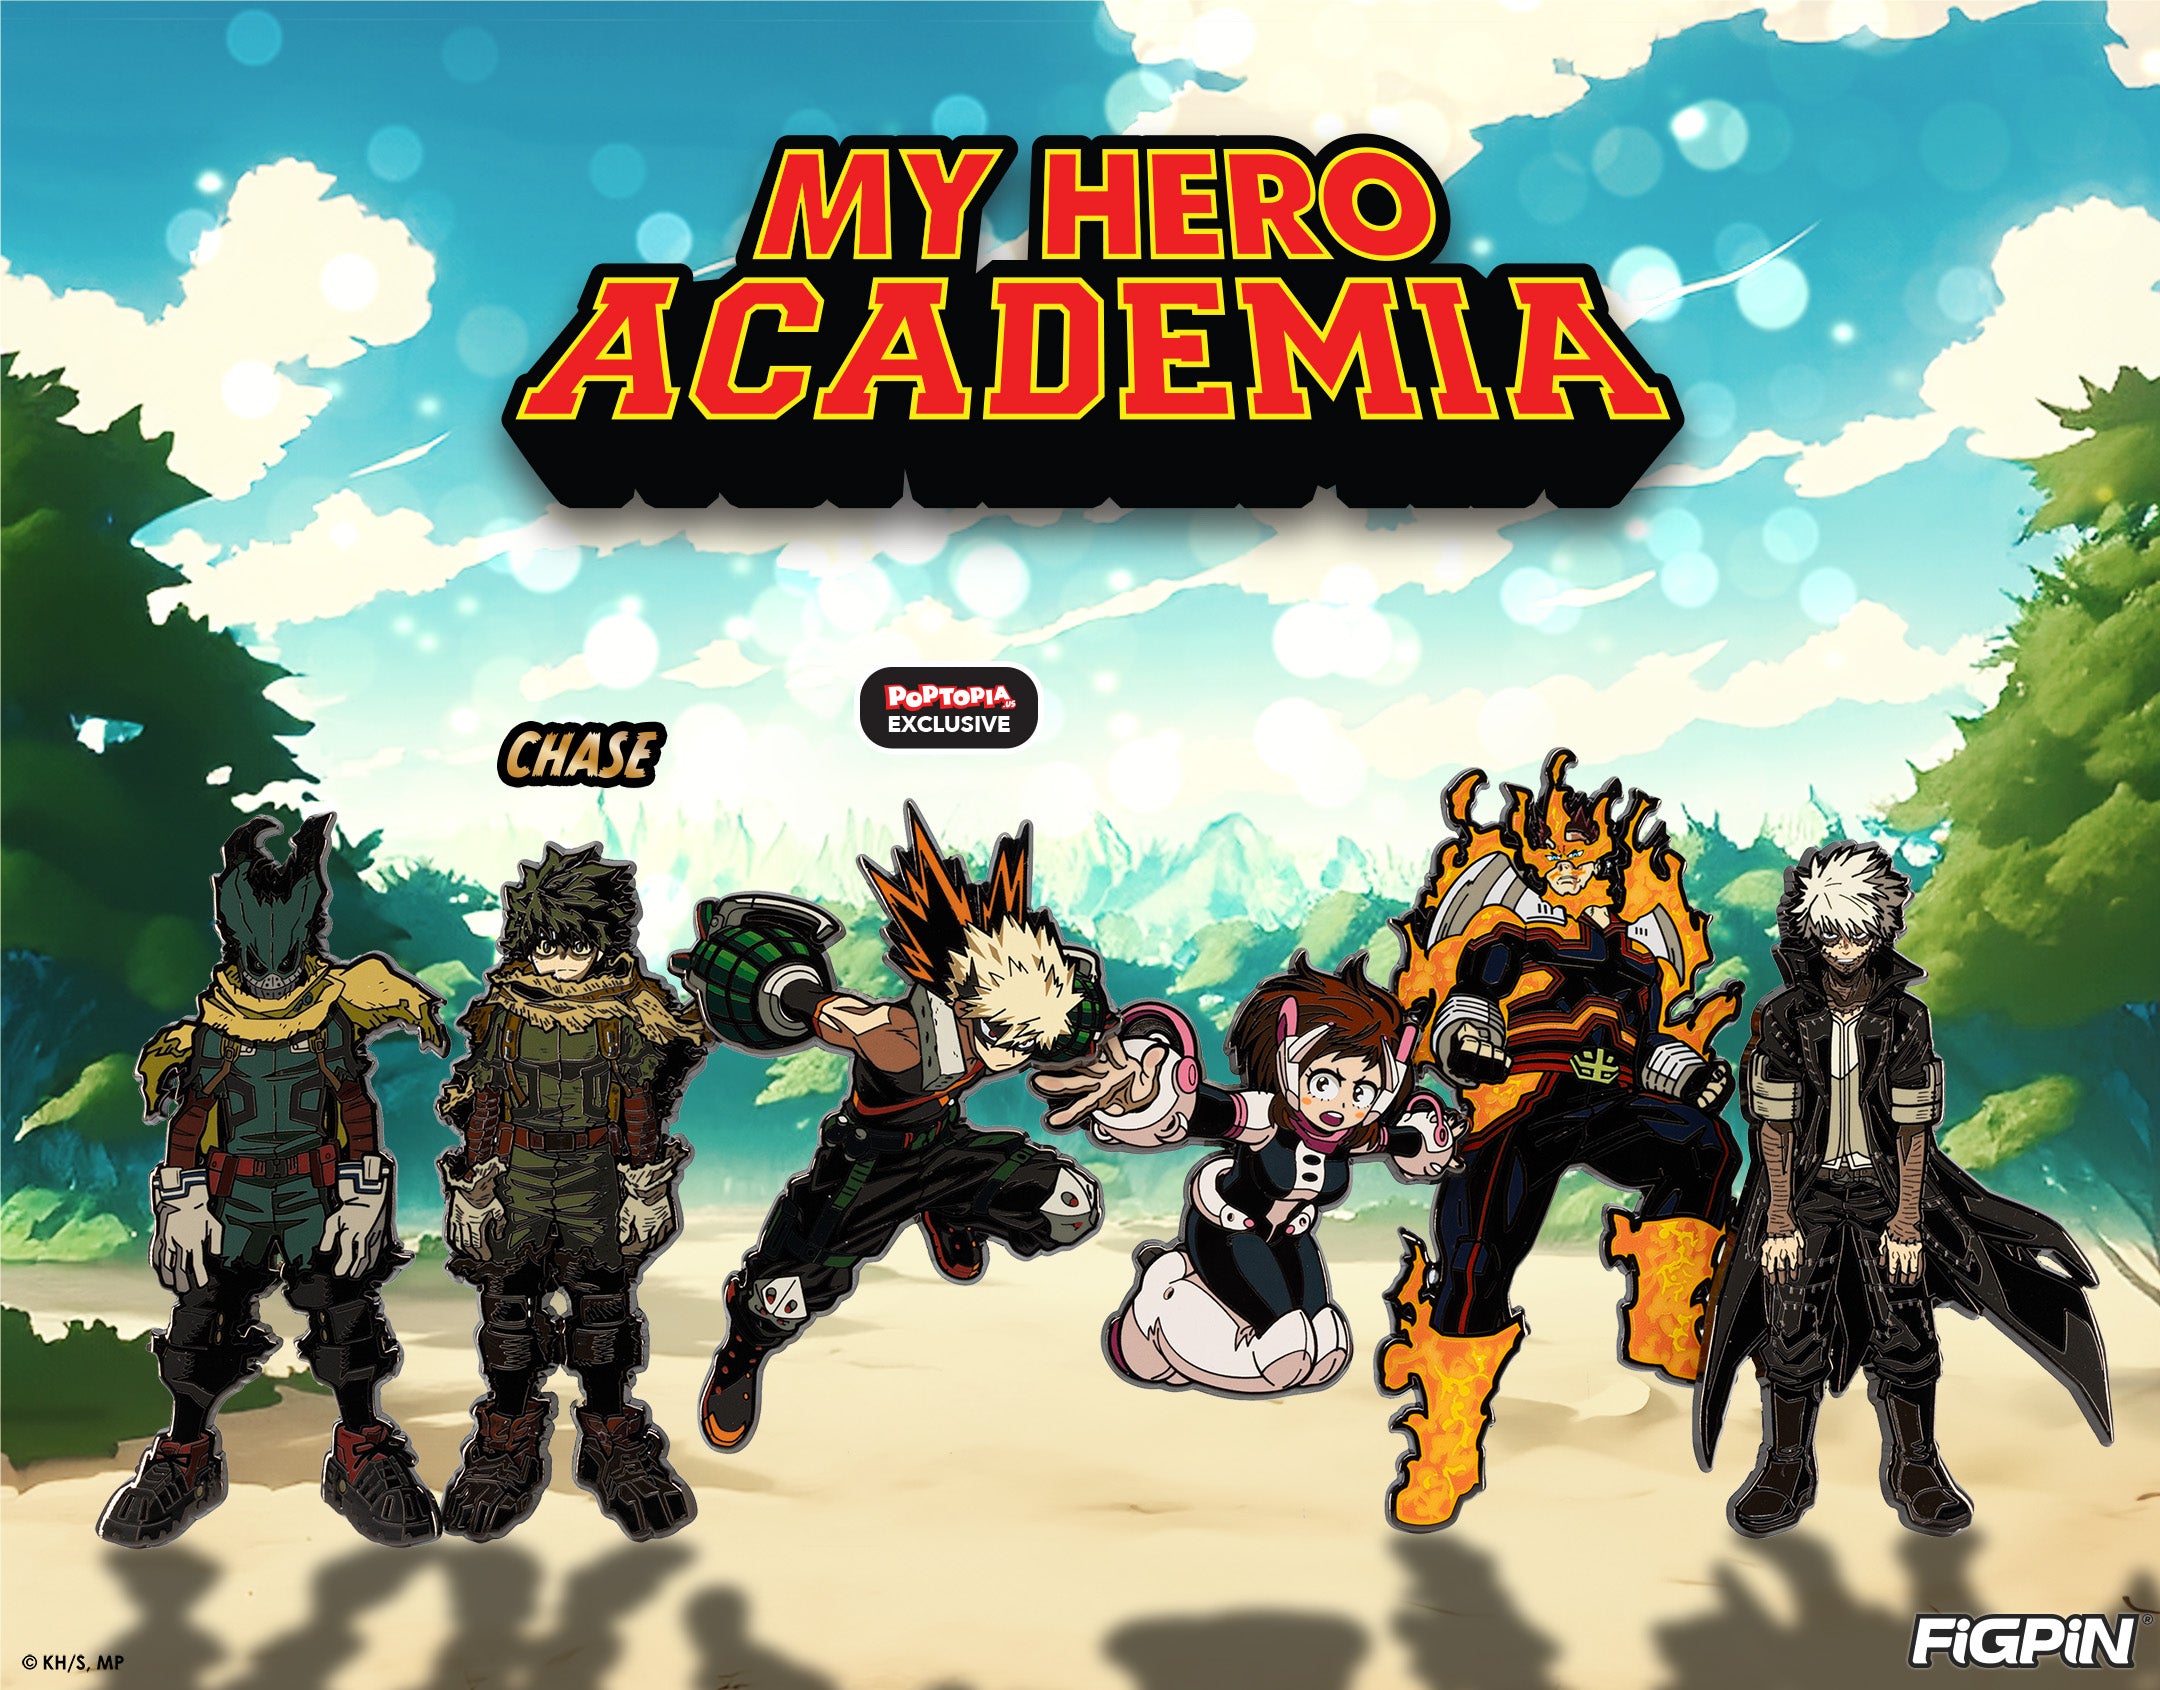 Photograph of My Hero Academia characters as enamel pins in this My Hero Academia FiGPiN wave release.